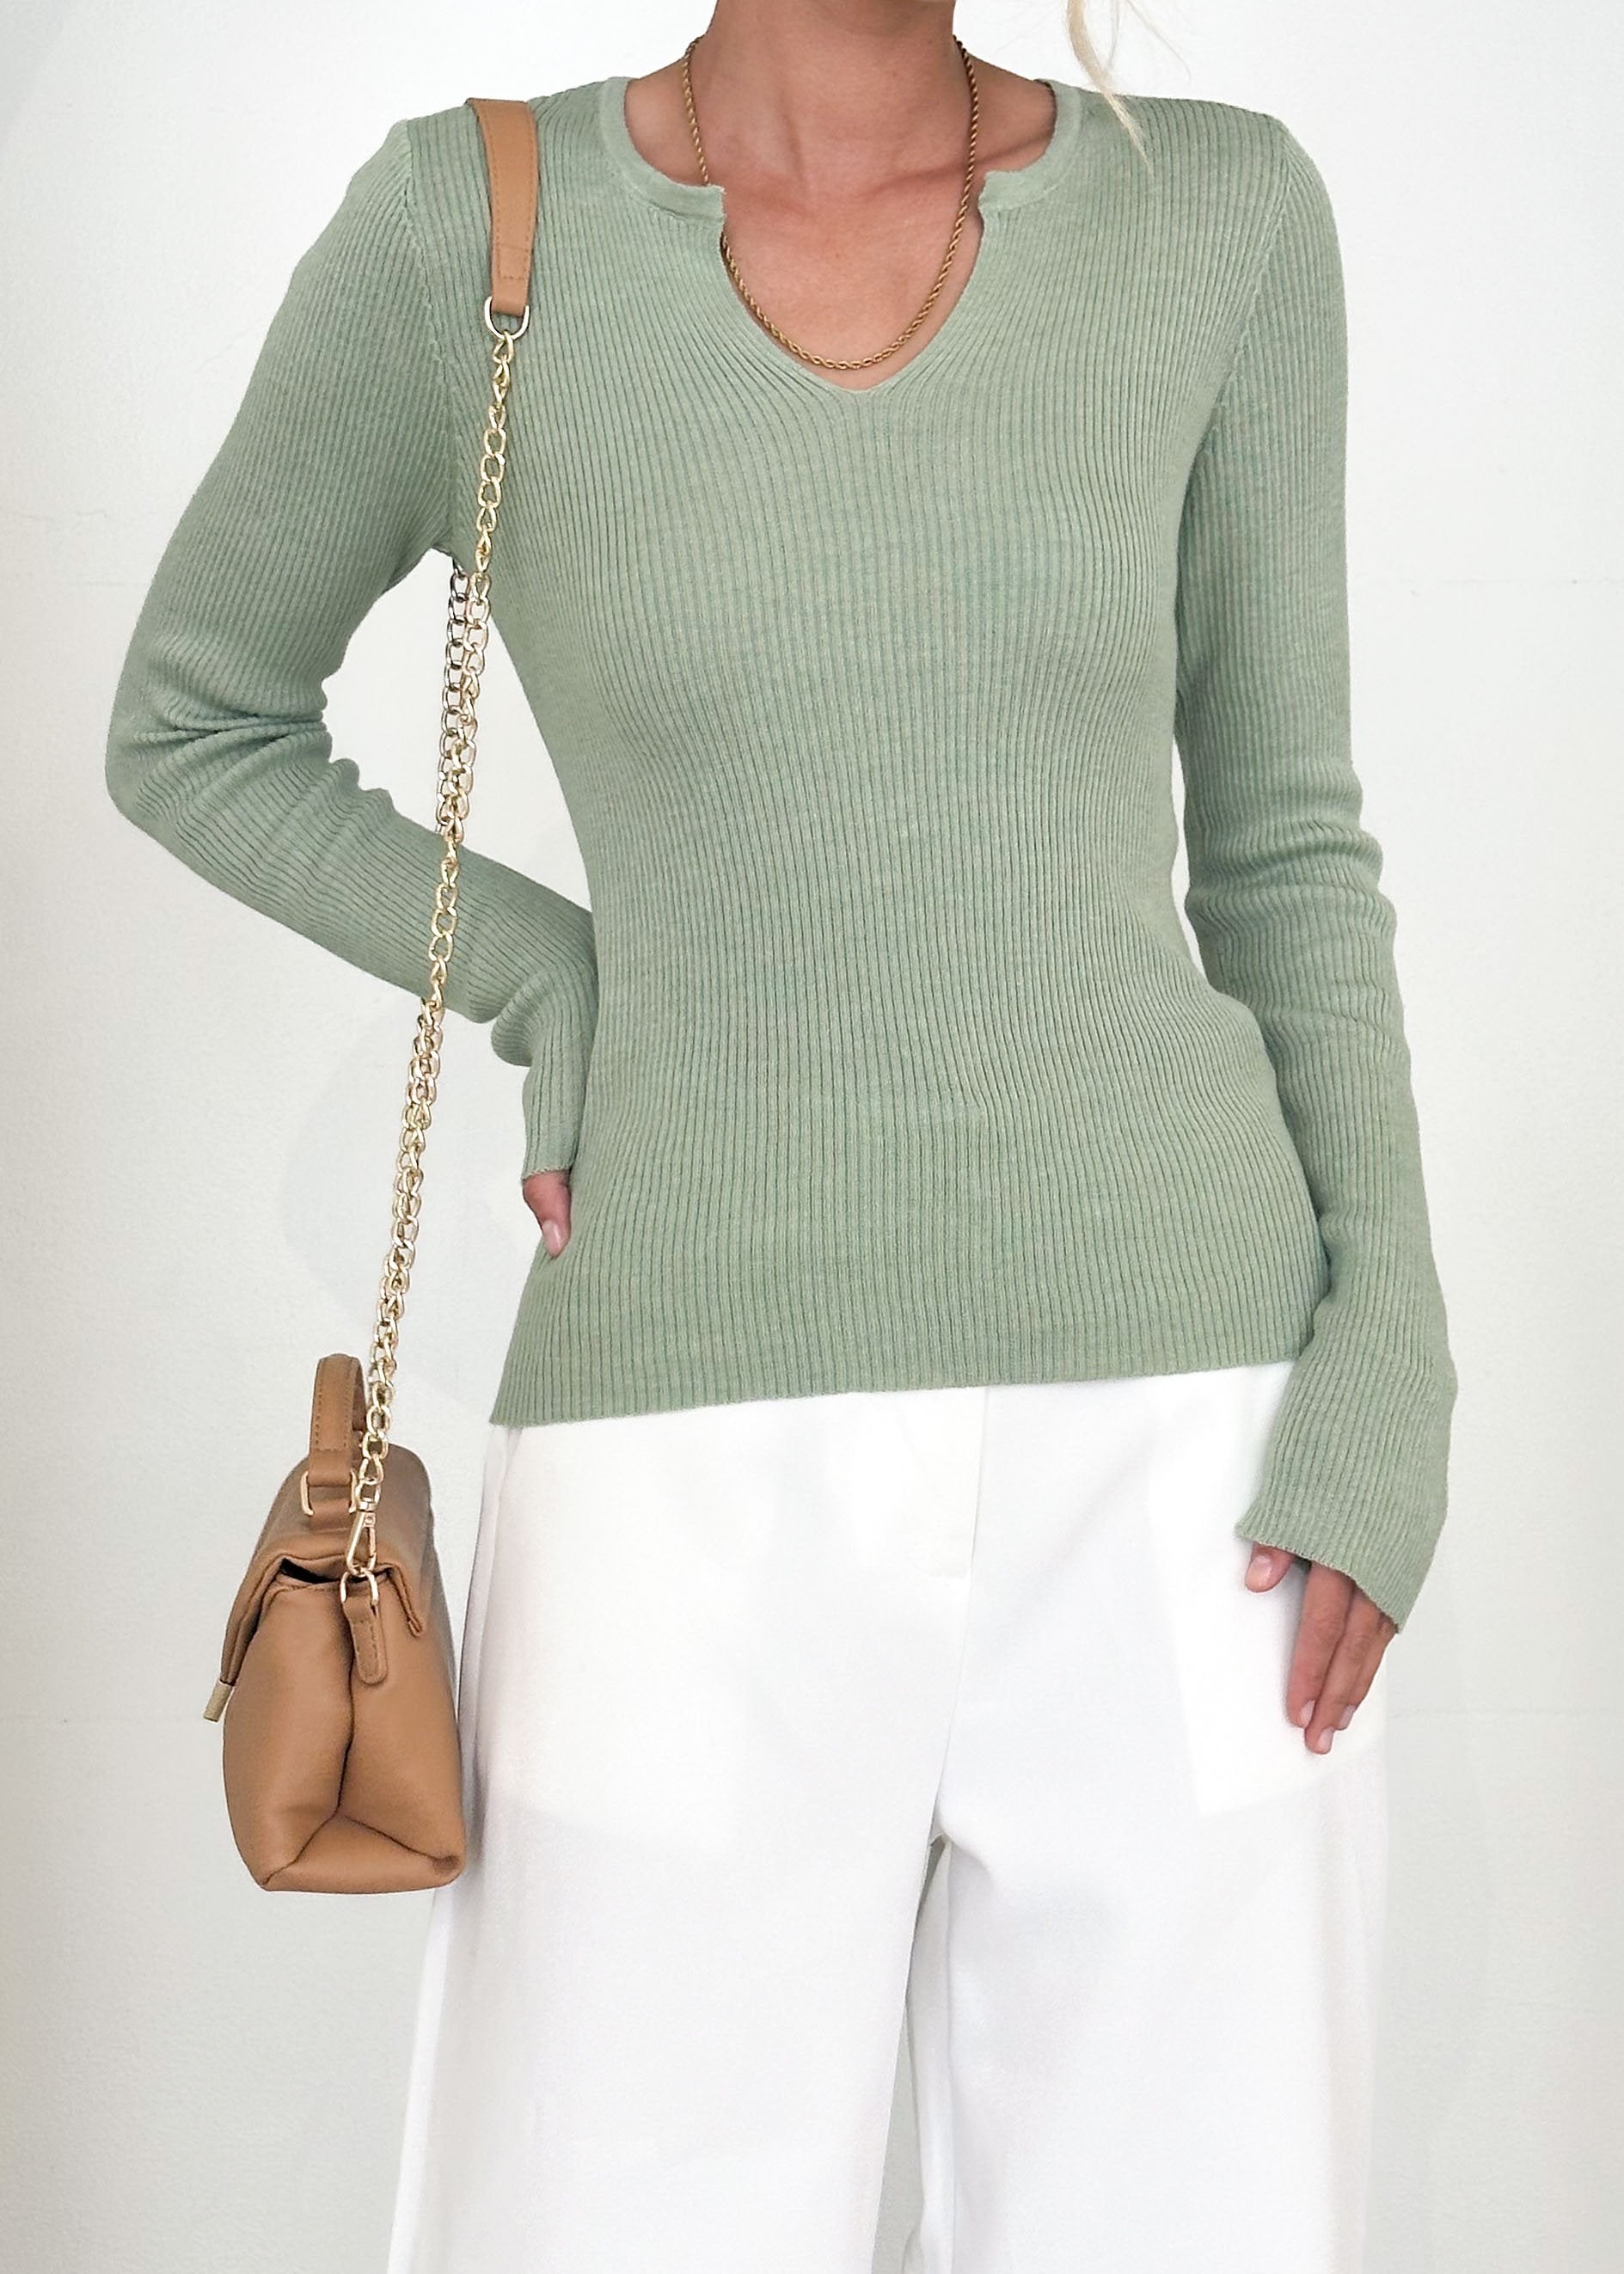 Avery Knit Top - Sage